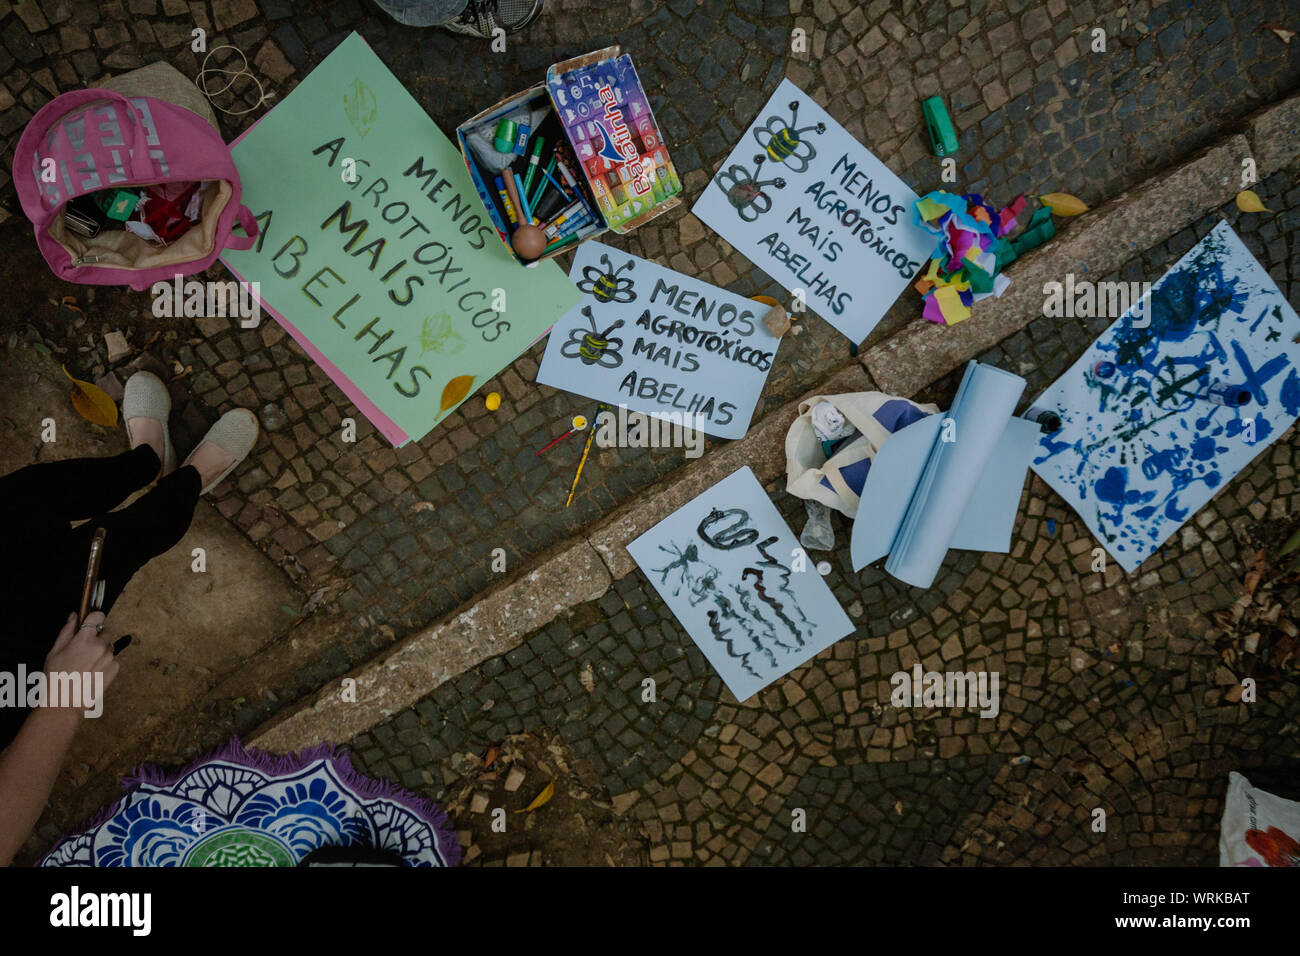 Save the bees banners made by children in a pro environment protest during the brazilian independence day Stock Photo